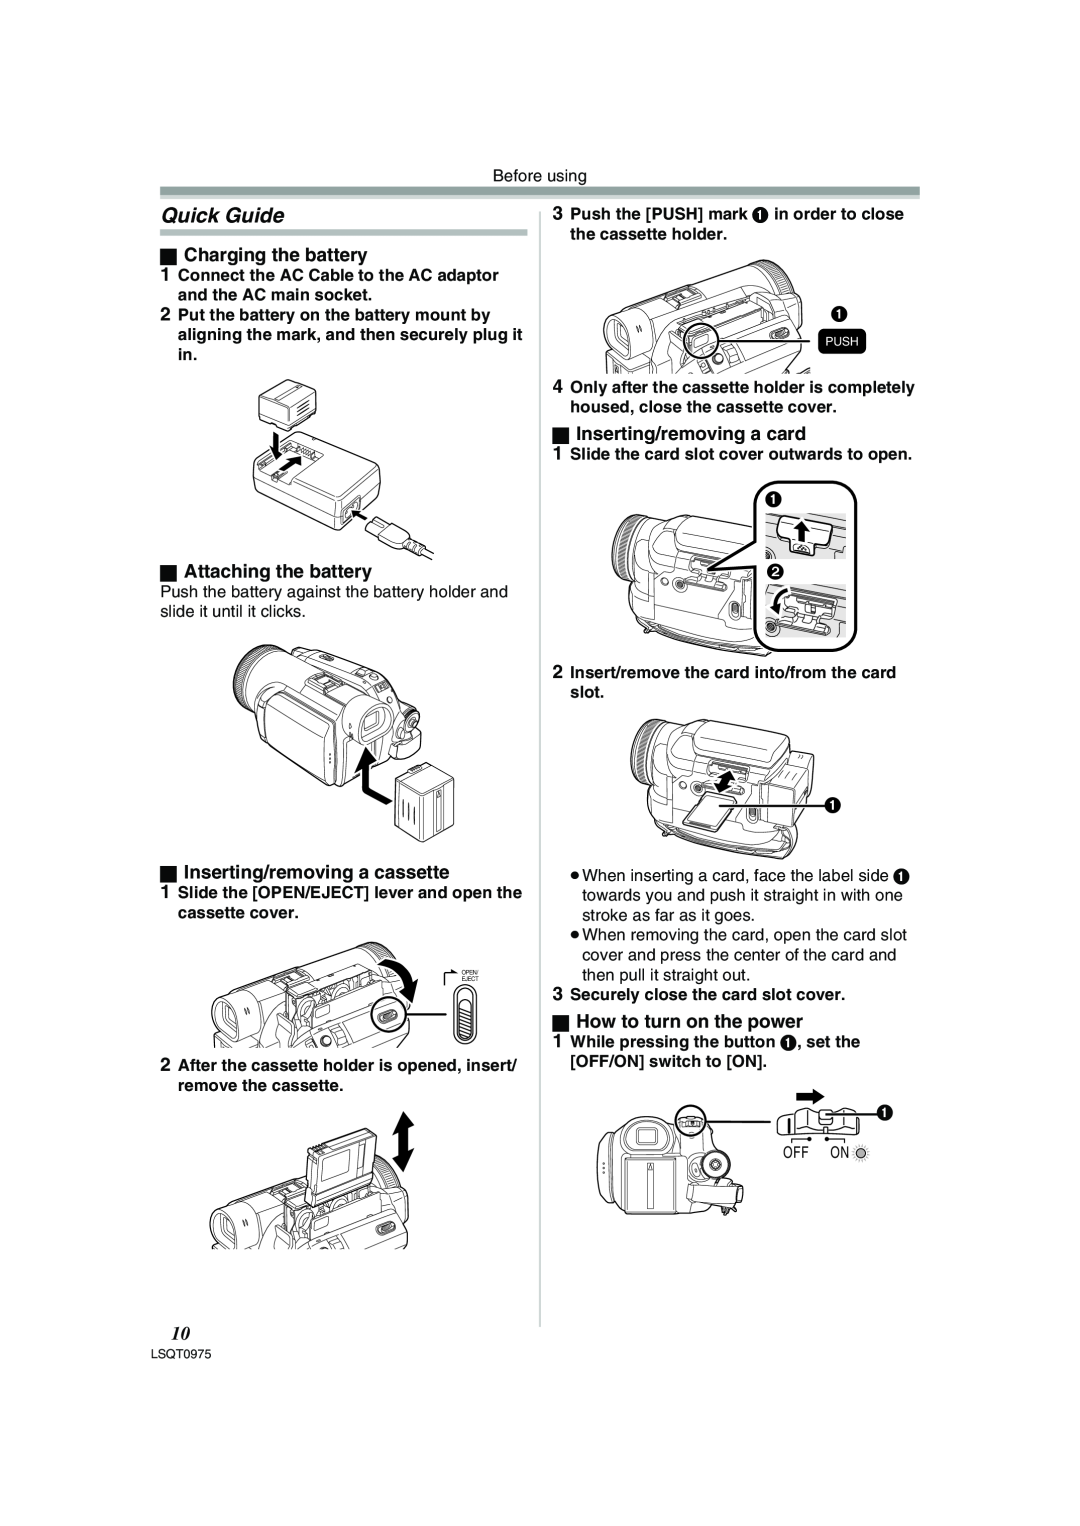 Panasonic PV-GS500 Quick Guide, ª Charging the battery, ª Attaching the battery, ª Inserting/removing a cassette 